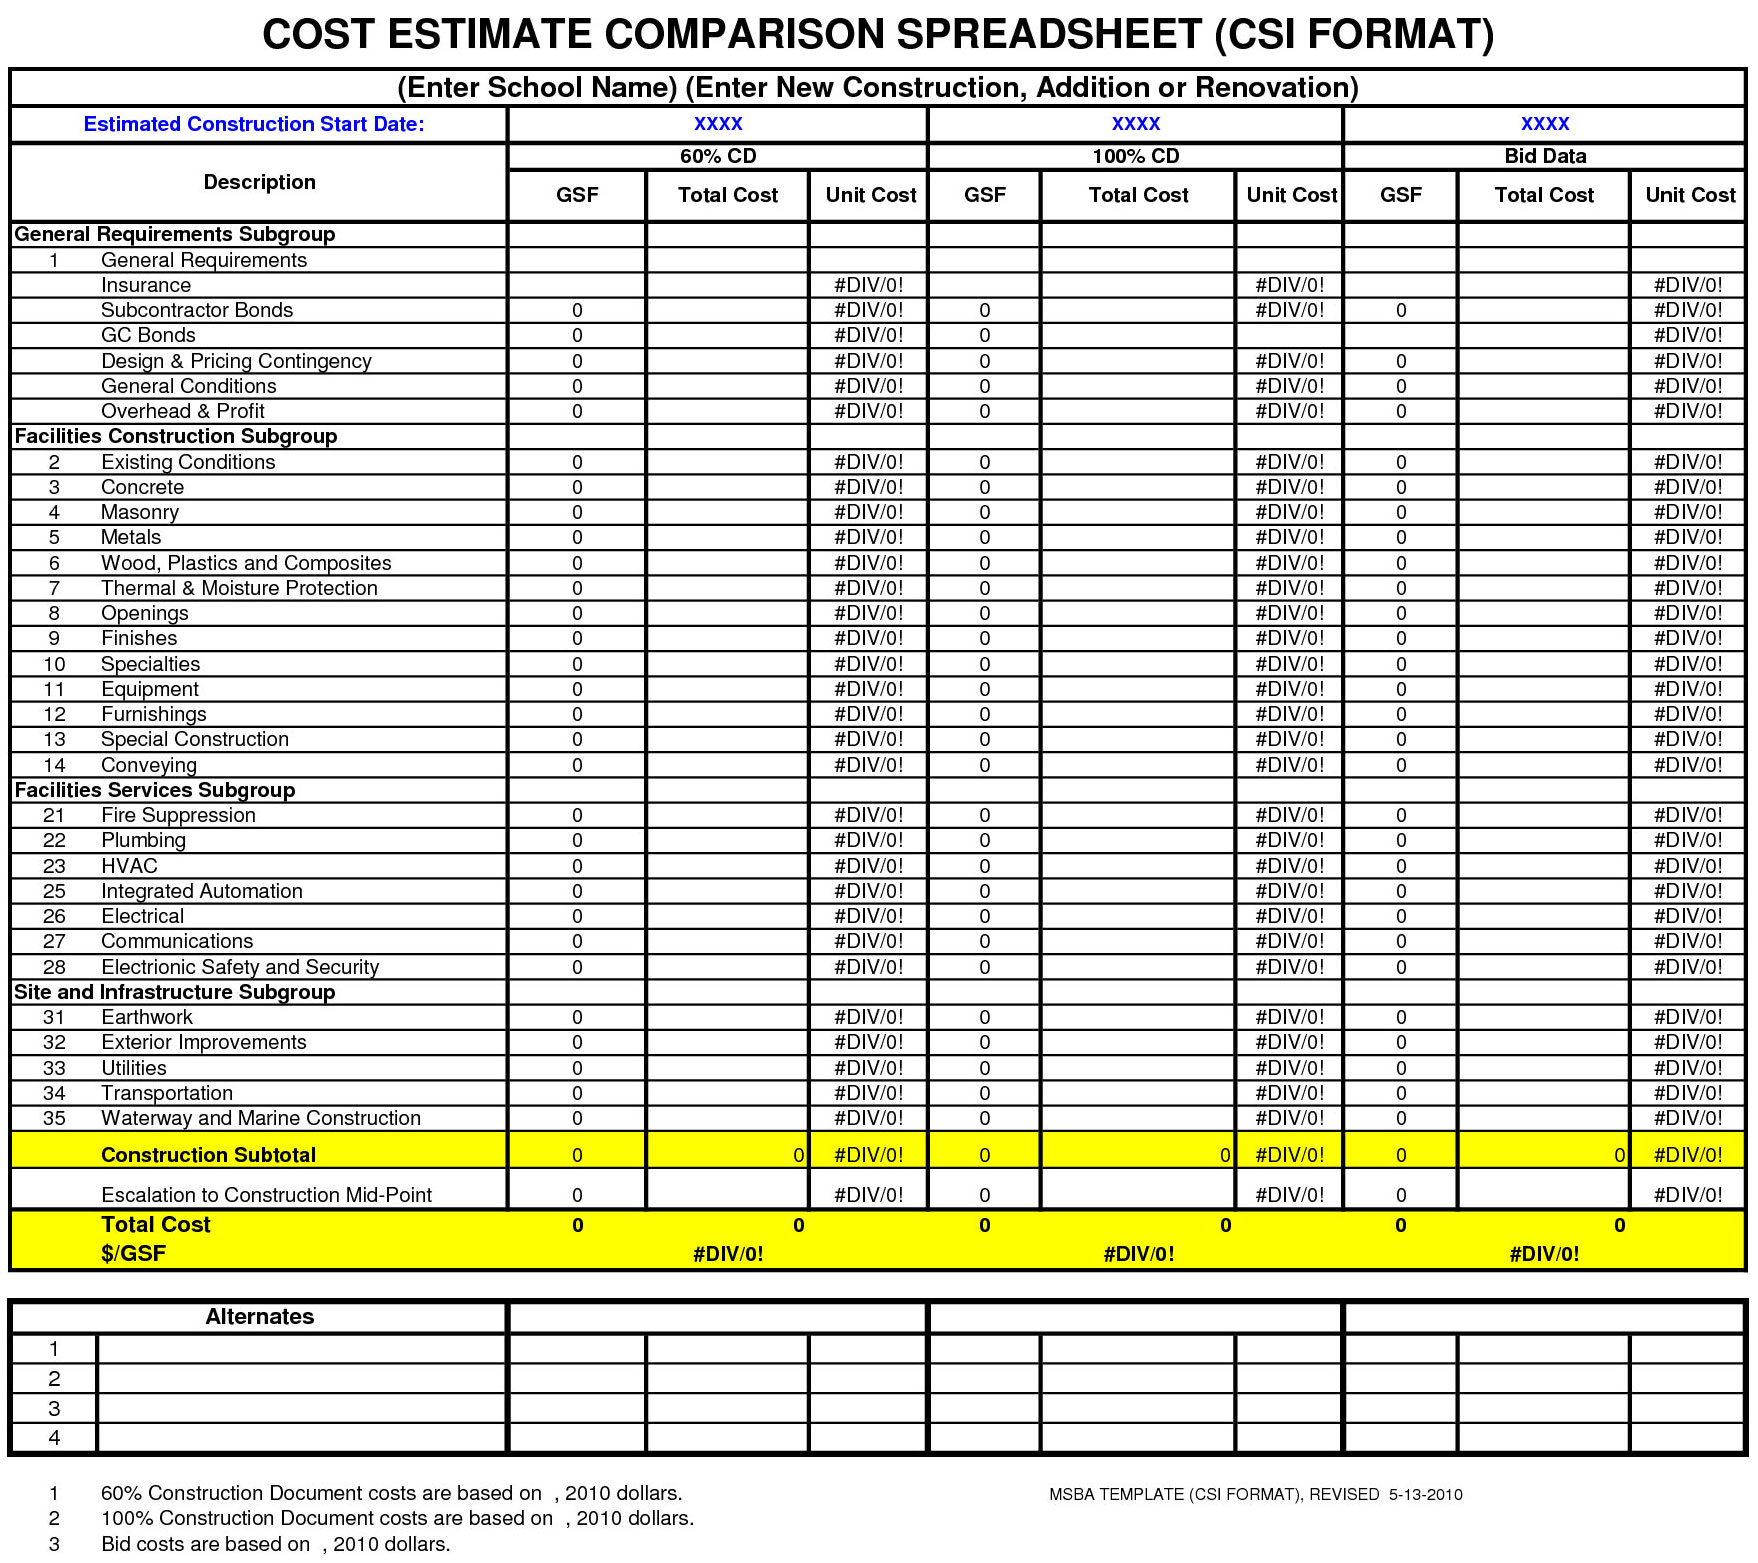 Cost Spreadsheet Intended For Cost Estimate Comparison Spreadsheet  Free Download Cost Estimator